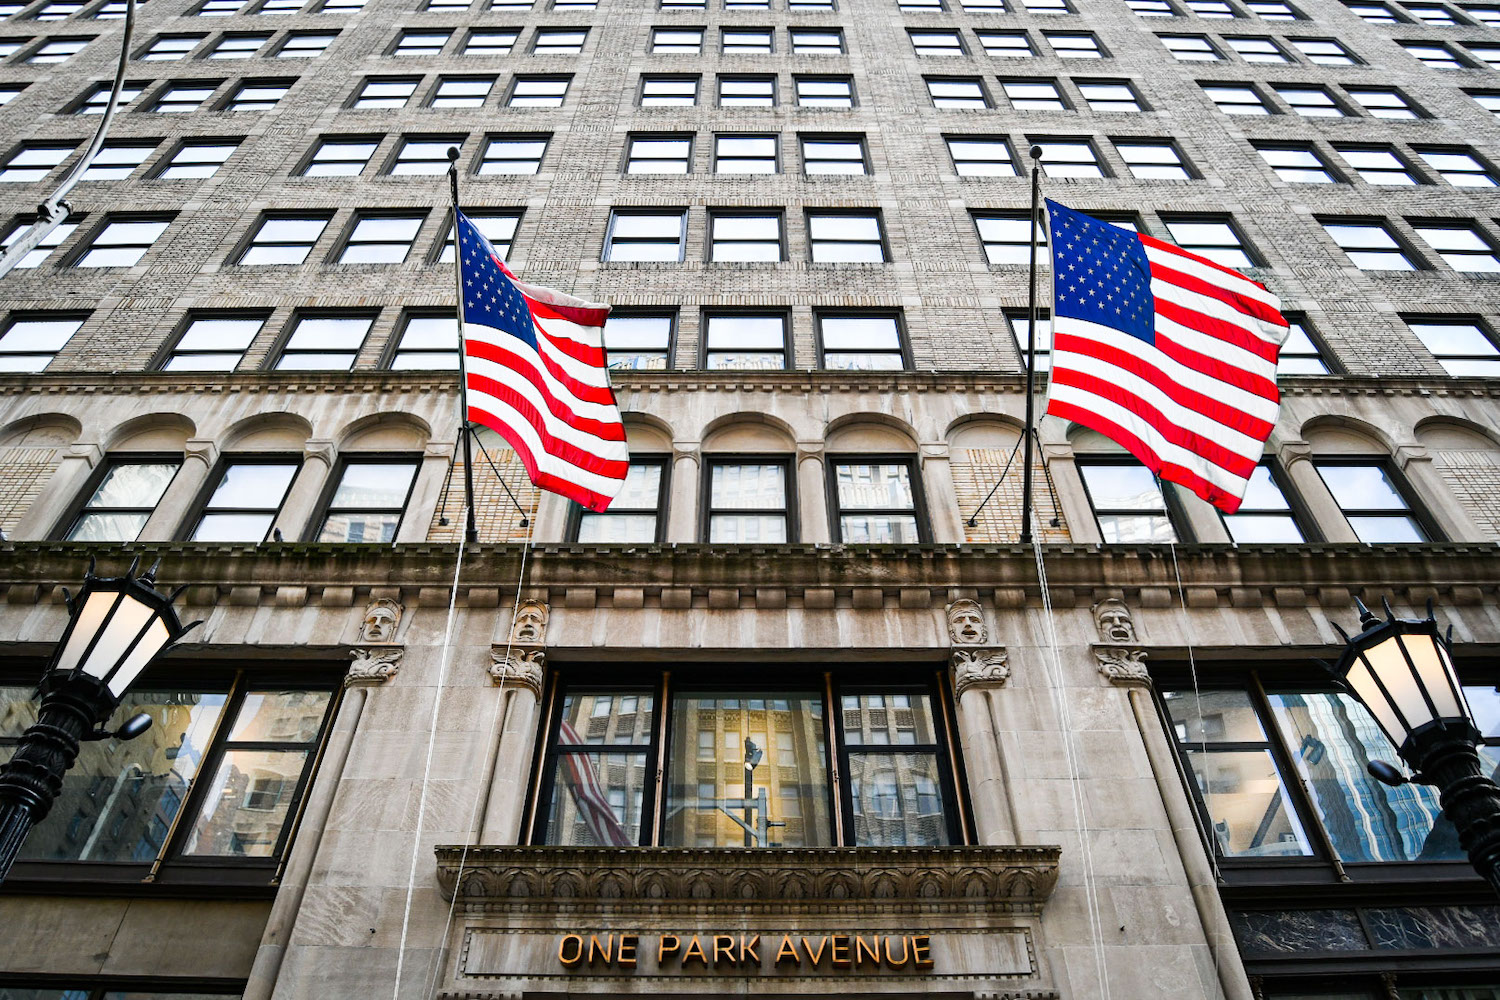 Two American flags hang from the exterior of a building marked as One Park Avenue. The building is partially made of bricks, and has small embedded columns and engraved faces.